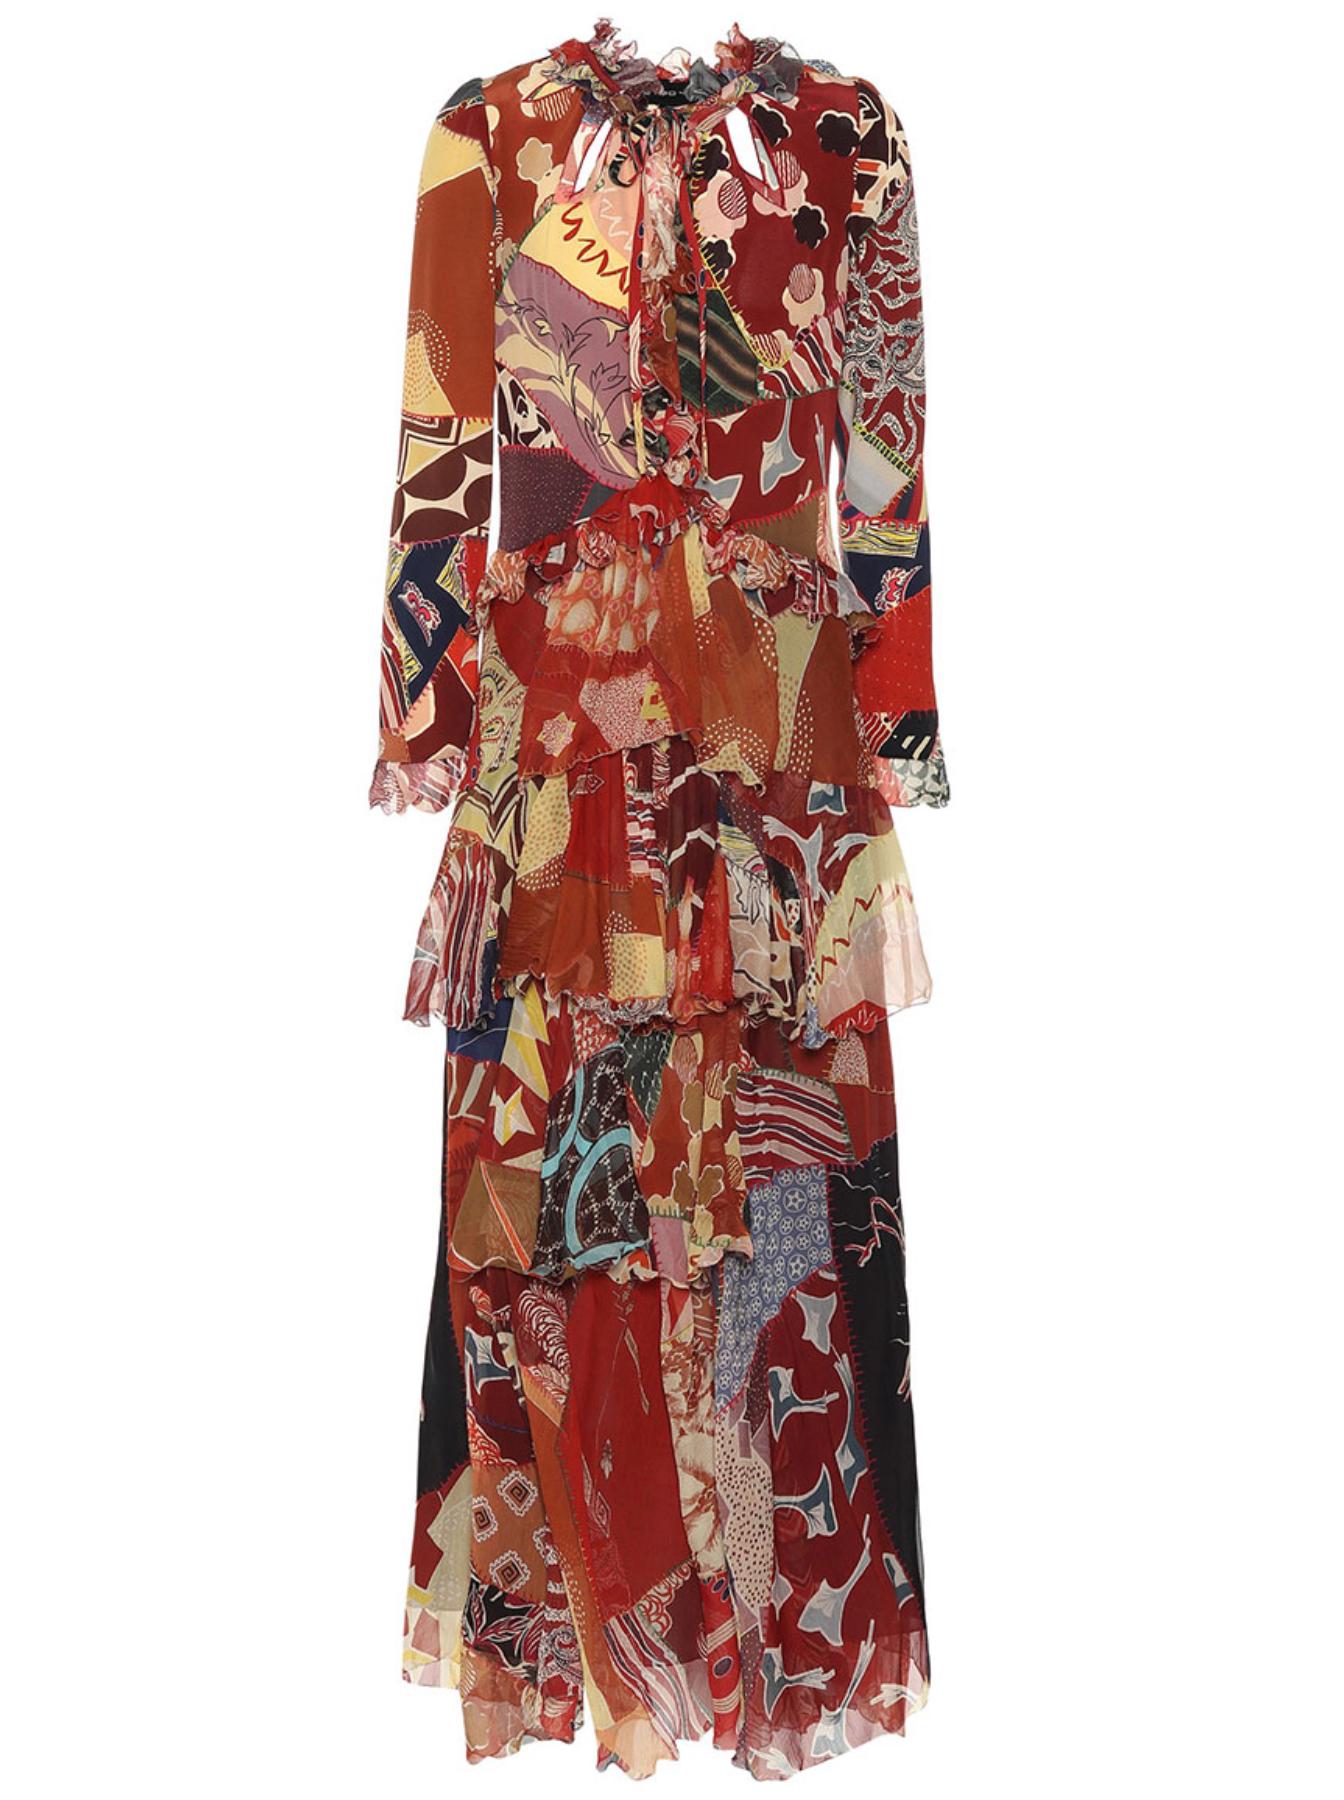 This Fall 2018 Runway Etro maxi dress features silk crêpe and crinkled chiffon material, a ruffled tiered silhouette, long sleeves, cutout details that are embroidered with red edges along the v-neck line, and a bold, colorful print. Brand new with